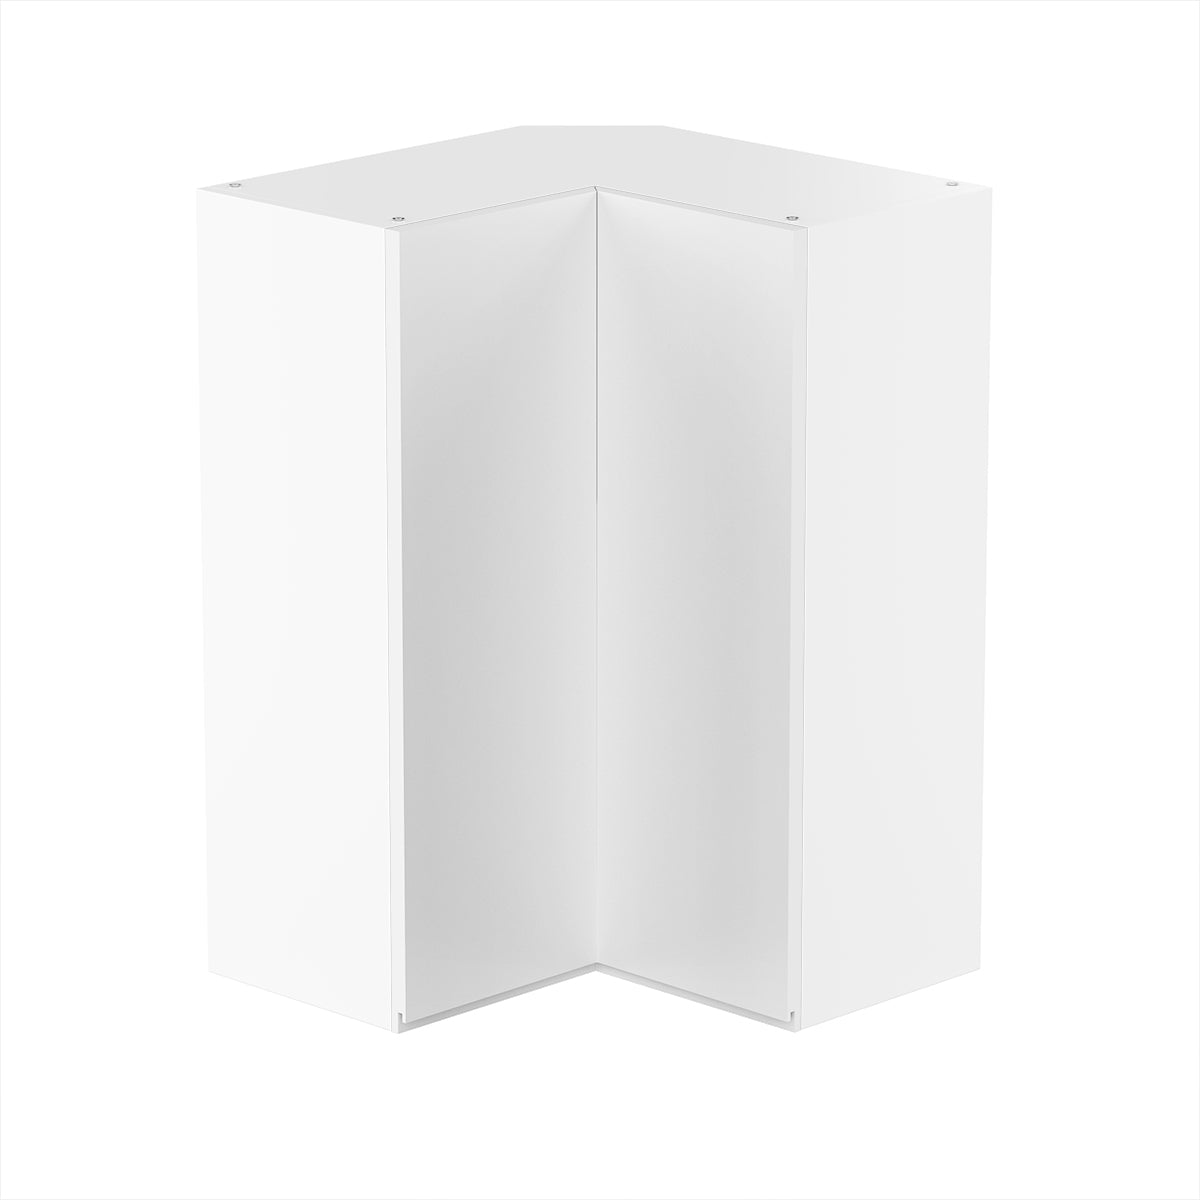 RTA Cabinet - Lacquer White - Easy Reach Wall Cabinet | 24"W x 36"H x 12"D